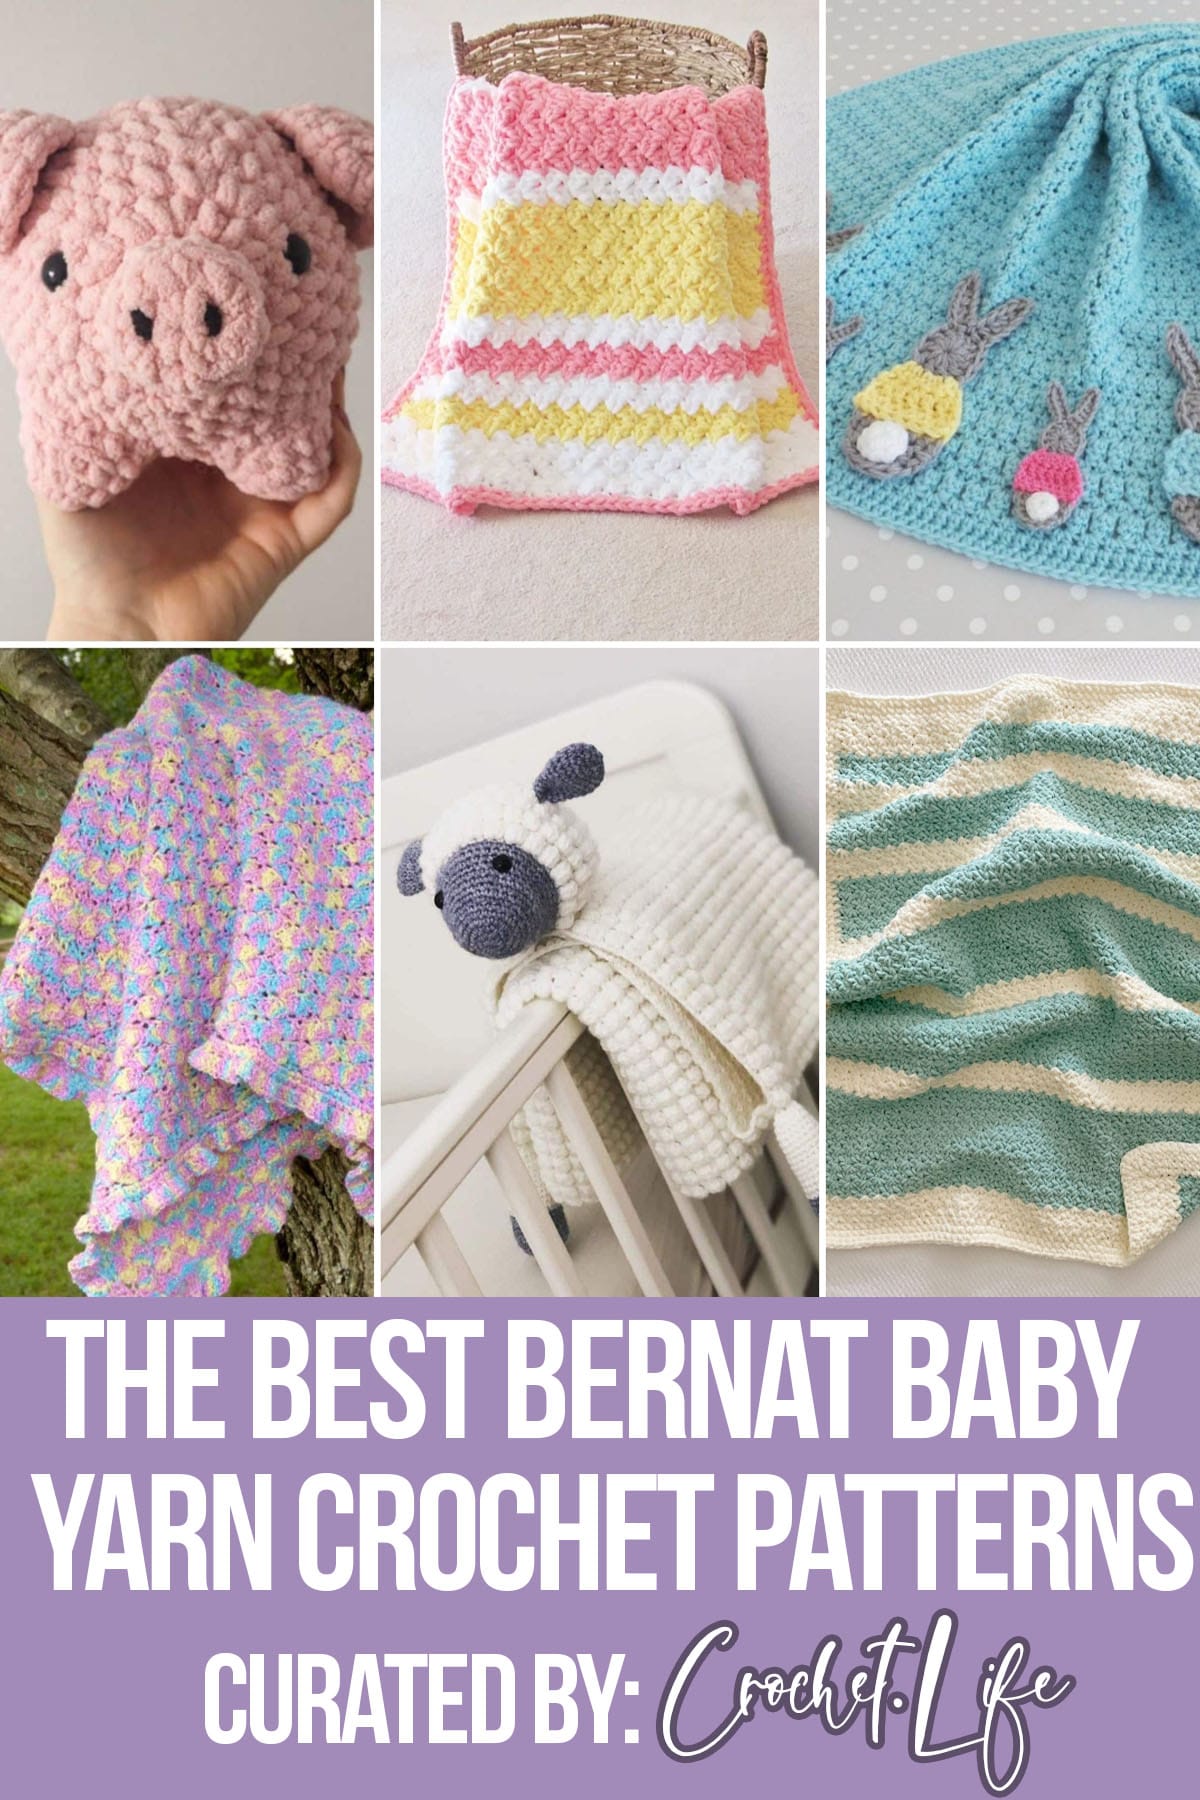 photo collage of bernat baby crochet patterns with text which reads the best bernat baby yarn crochet patterns curated by crochet.life